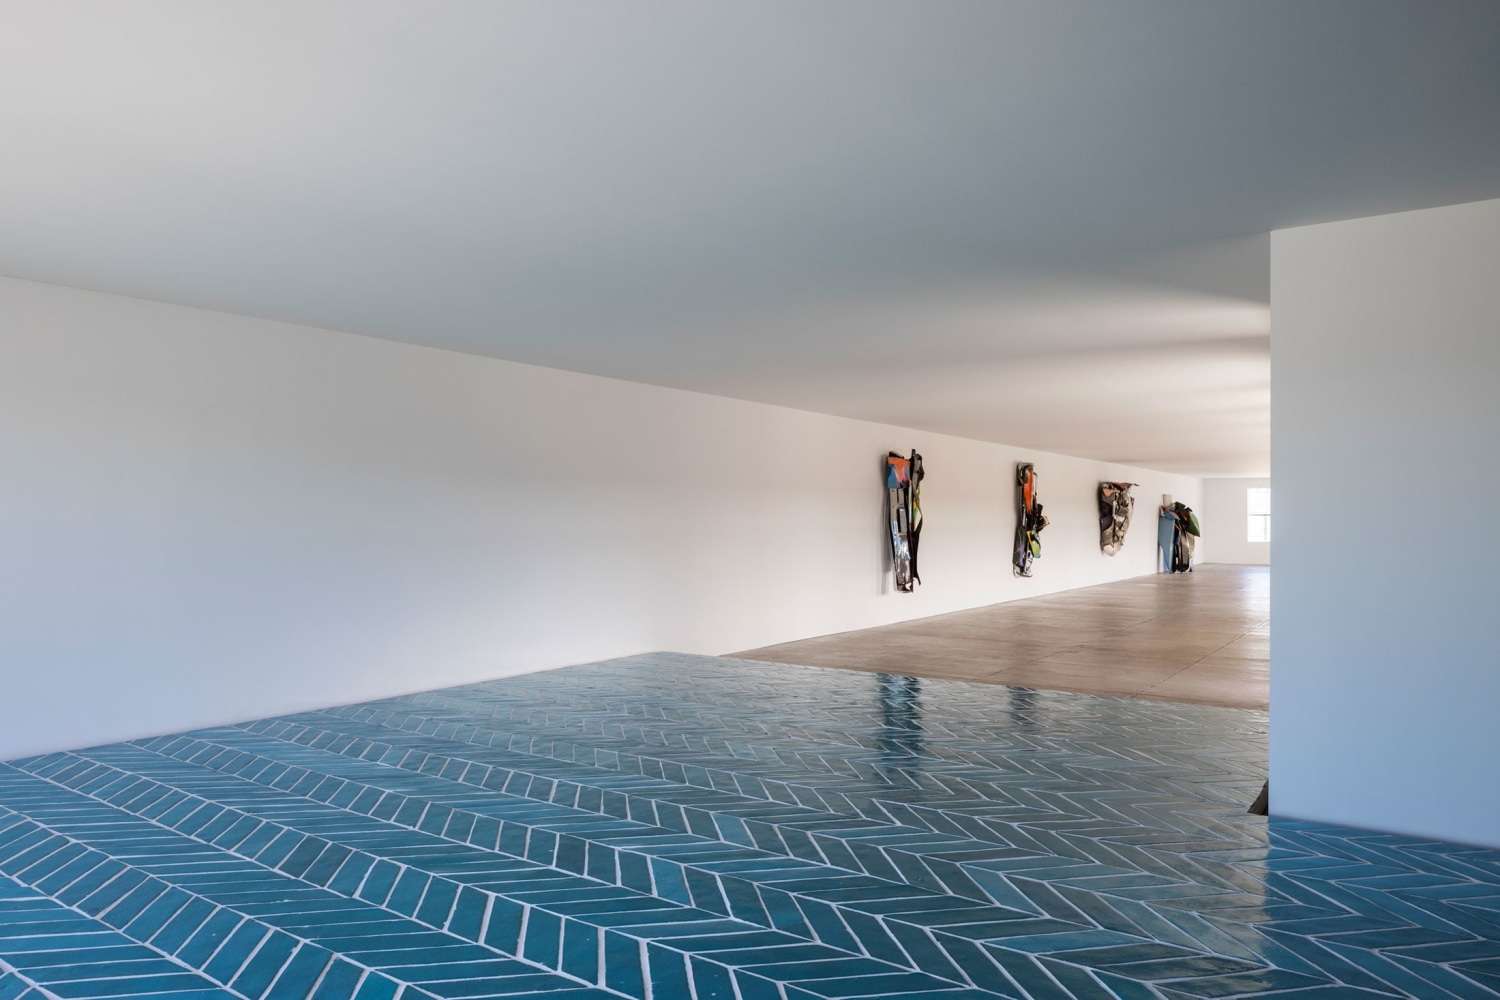 Sarah Crowner
Platform (Blue Green Terracotta for JC), 2022
Installation View
The Chinati Foundation, Marfa, TX
Image courtesy The Chinati Foundation
Photo: Alex Marks
&amp;copy; 2023 Fairweather &amp;amp; Fairweather LTD / Artists Rights Society (ARS), New York